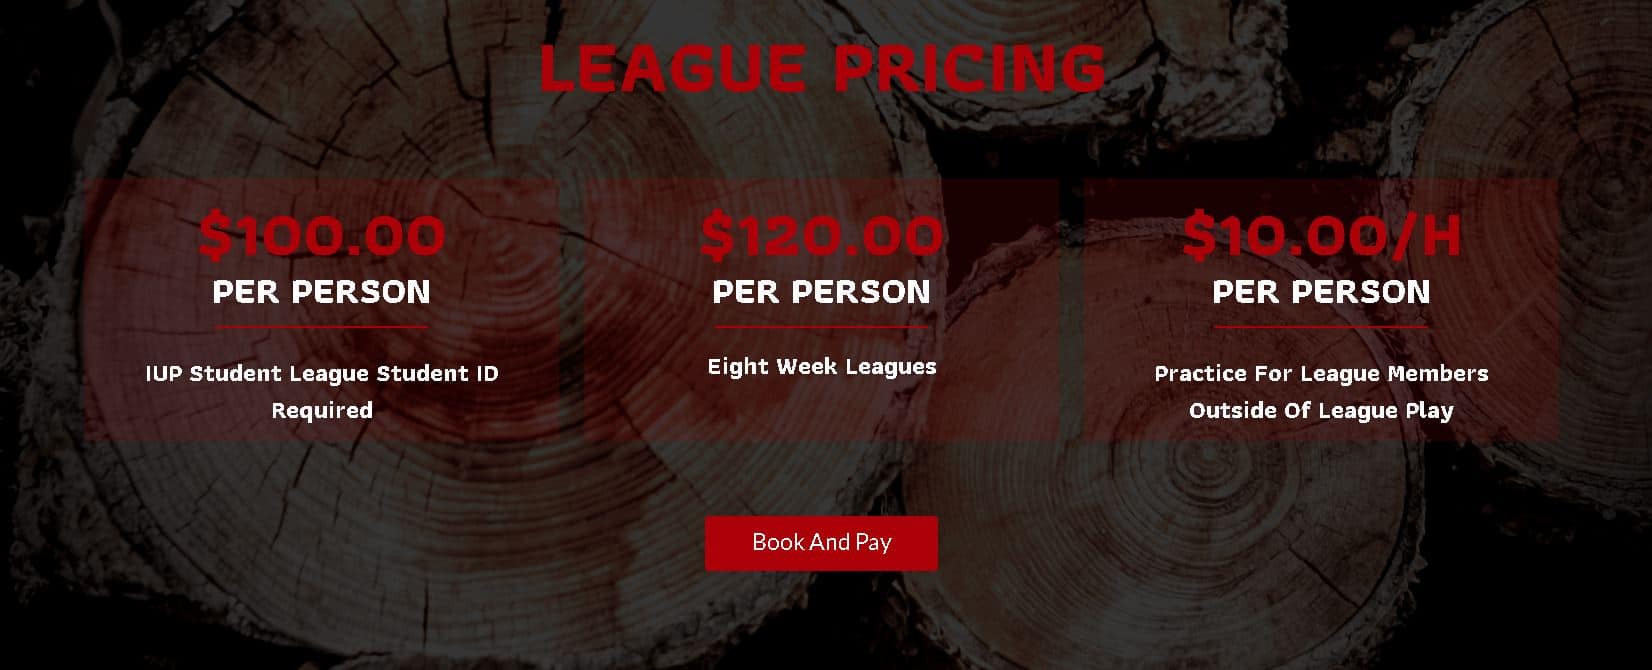 League Pricing Pic